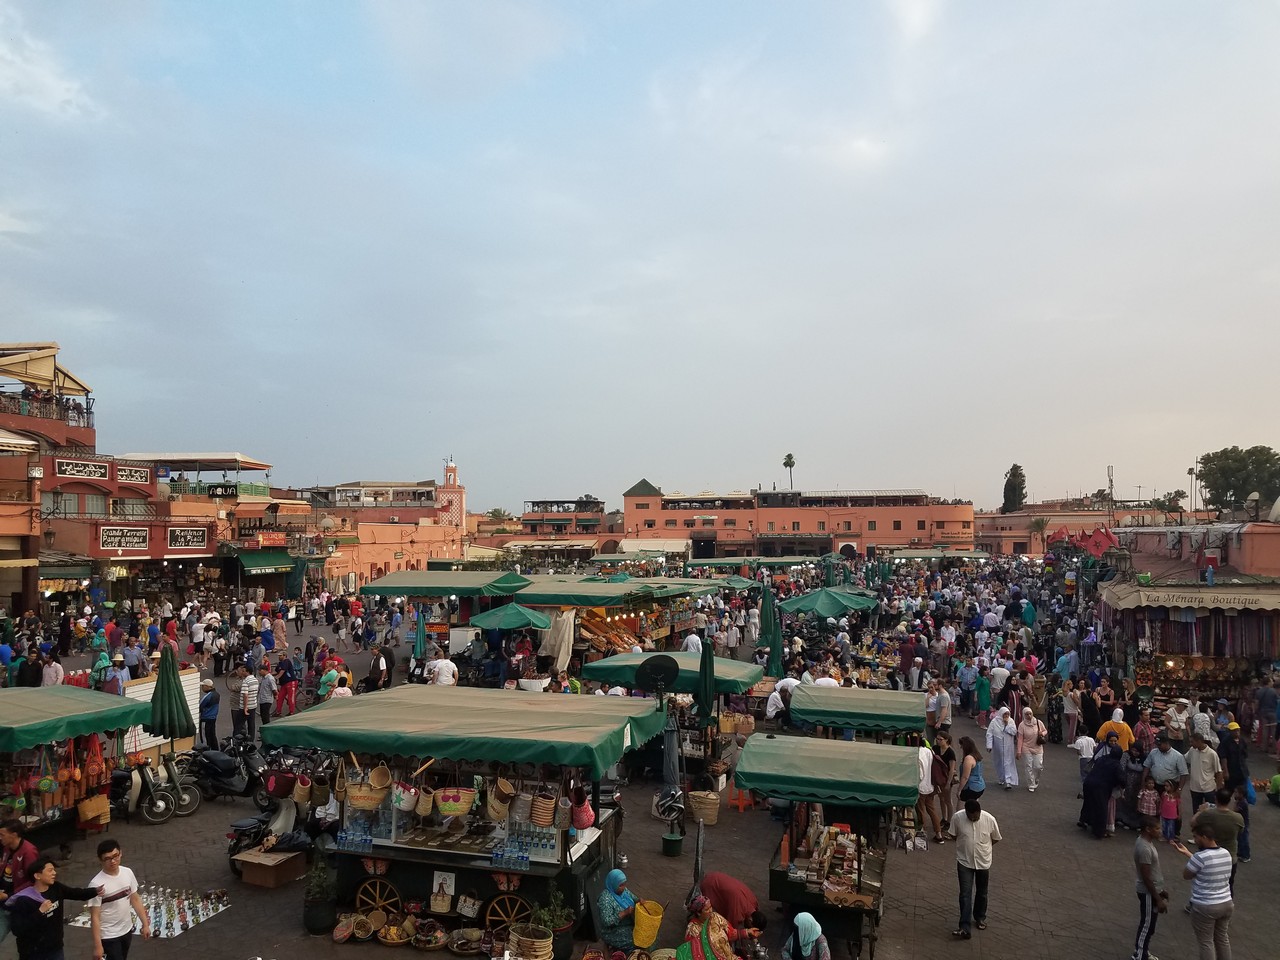 a crowd of people in a square with tents